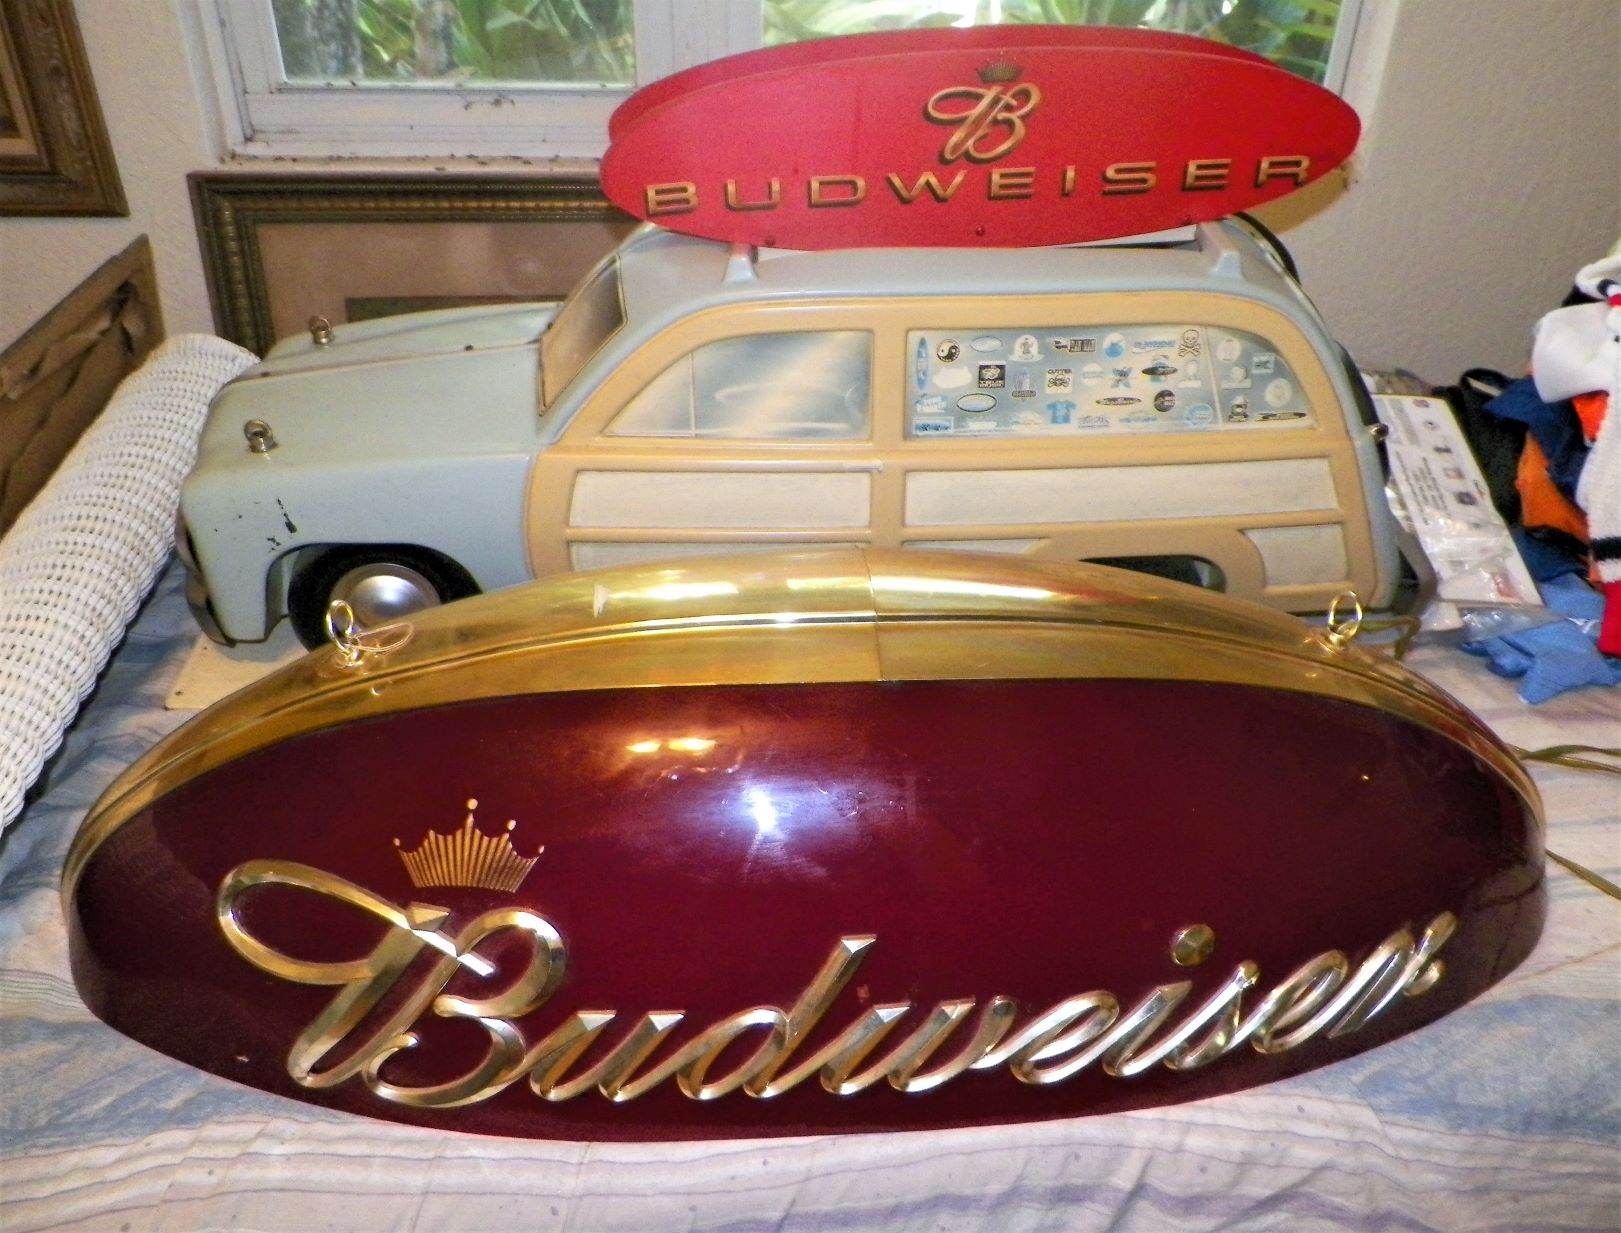 COLLECTIBLE BEER BUDWEISER A GROUP POOL TABLE LAMP LIGHT 1AAzz.jpg